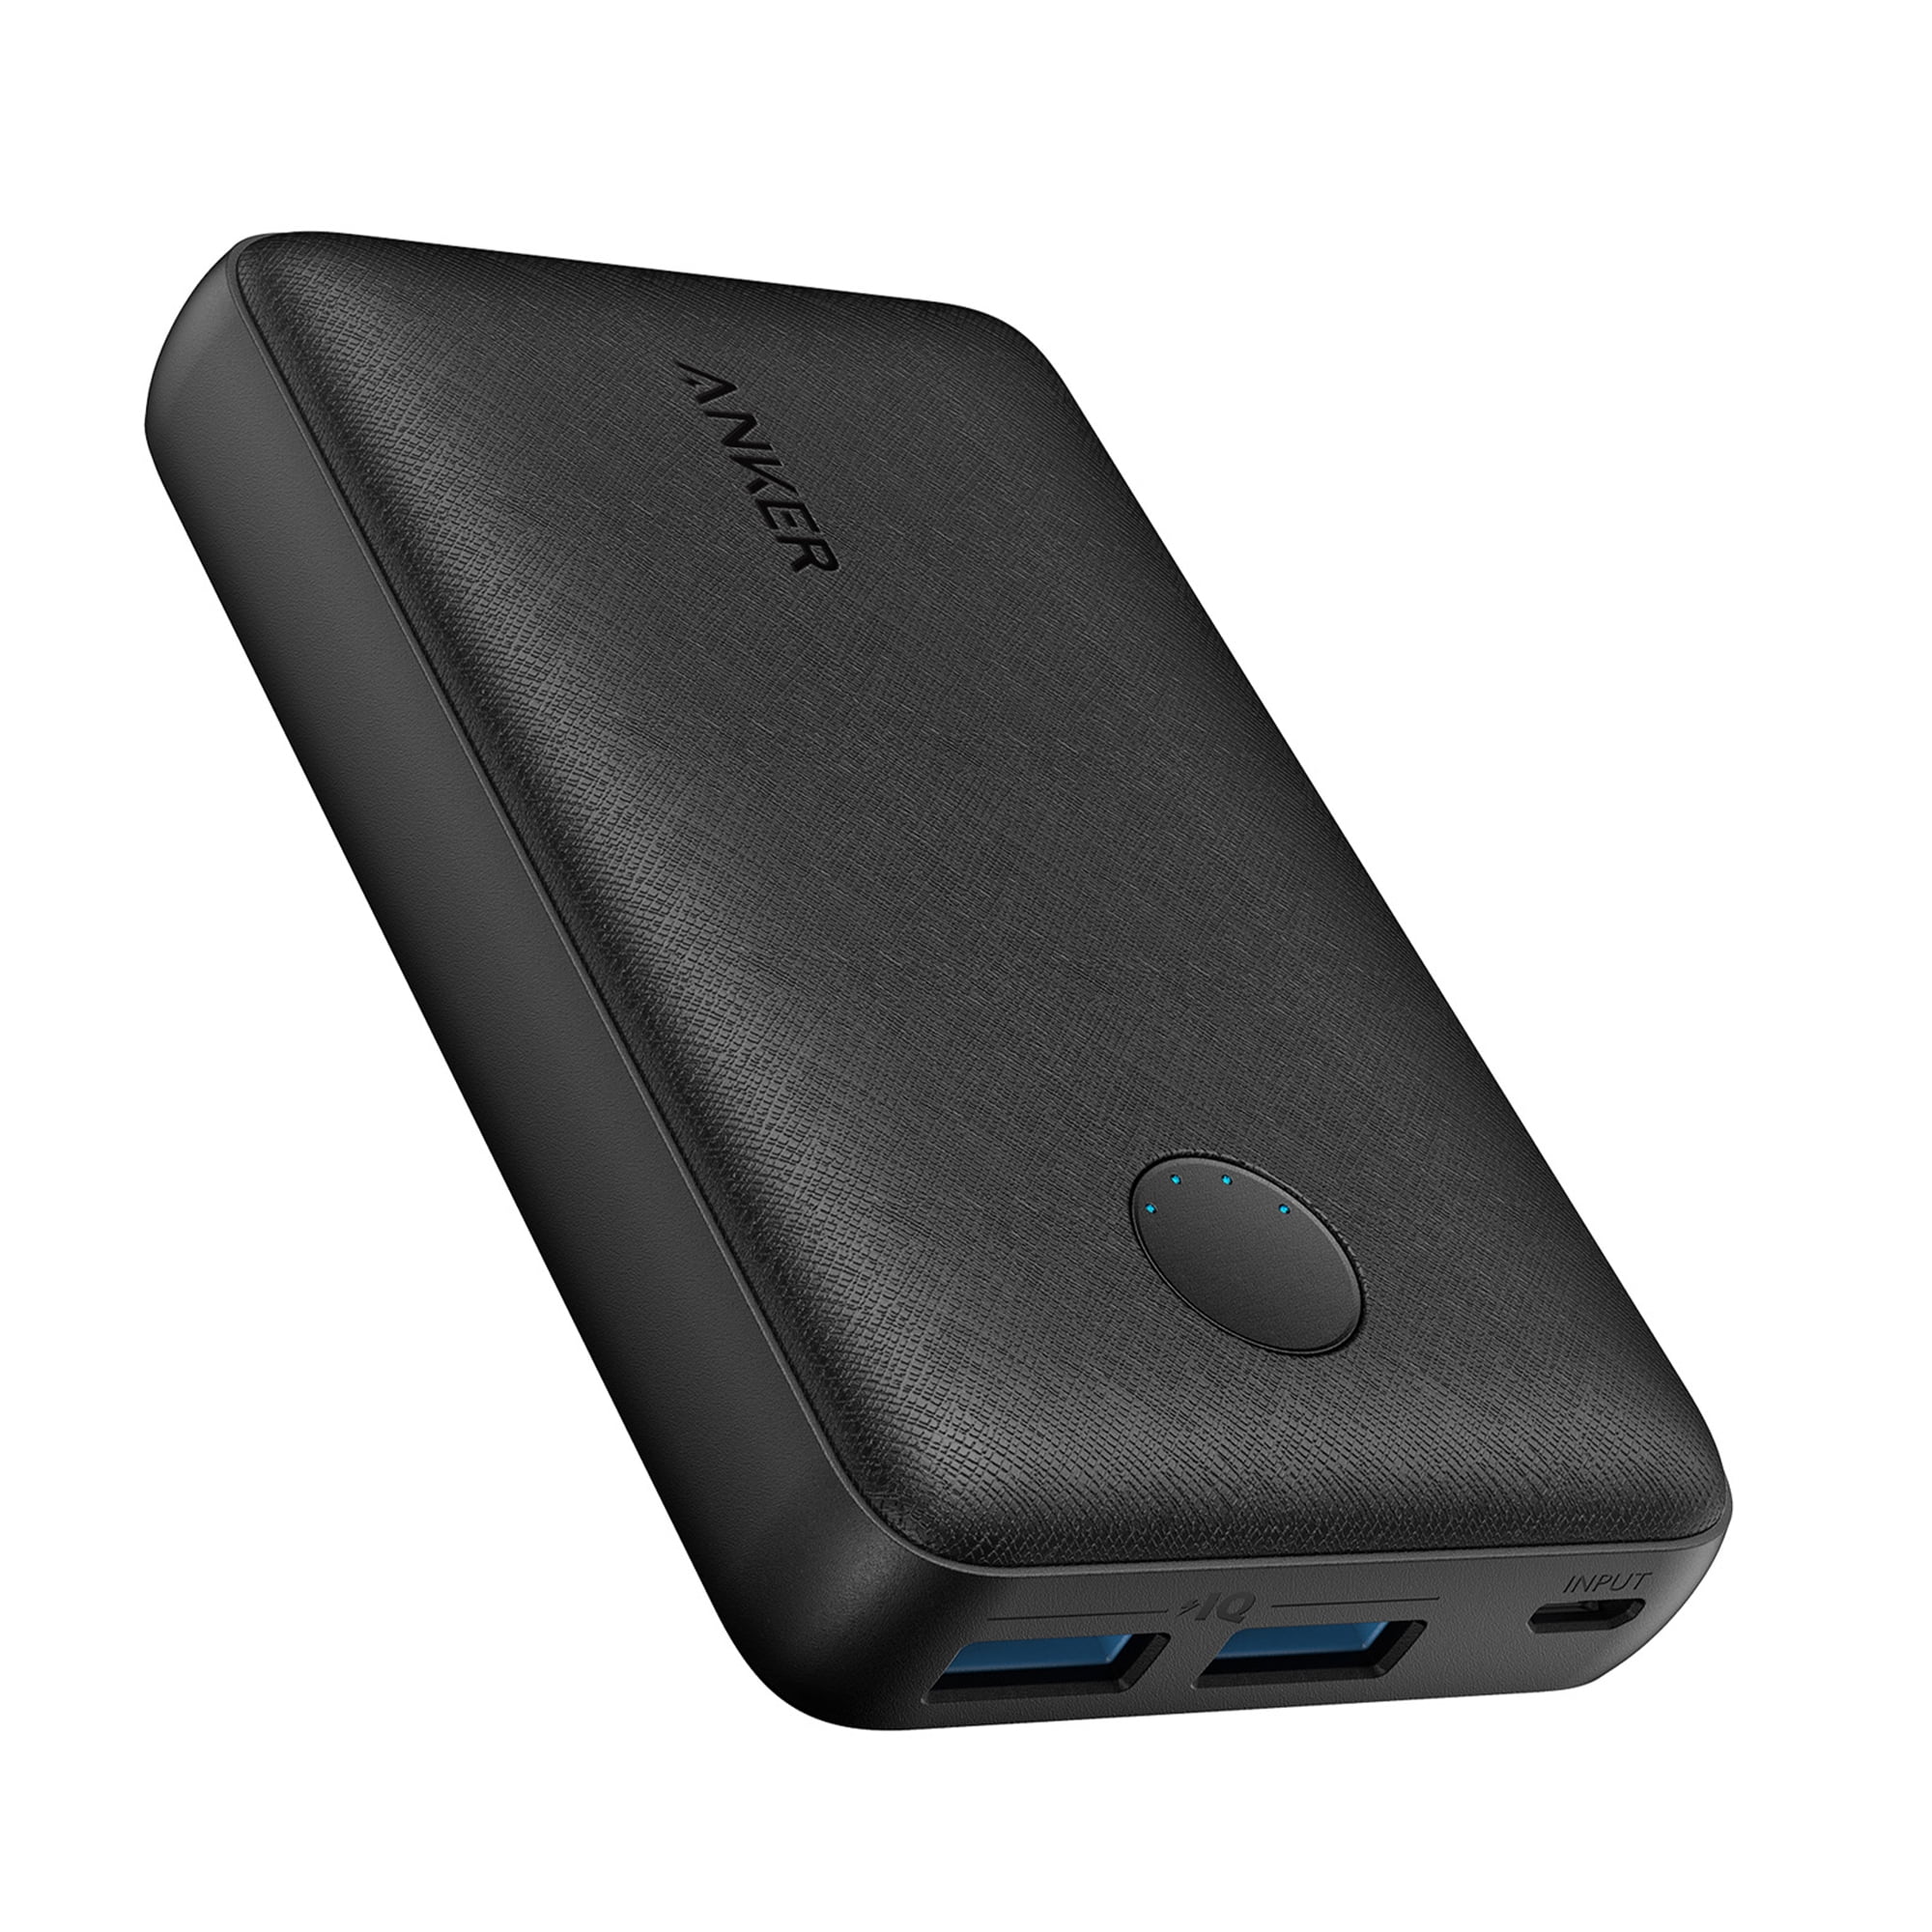 Skulle Atticus sandhed Anker PowerCore Select 10000 Portable Charger - Black, Ultra-Compact,  High-Speed Charging Technology Phone Charger for iPhone, Samsung and More.  - Walmart.com